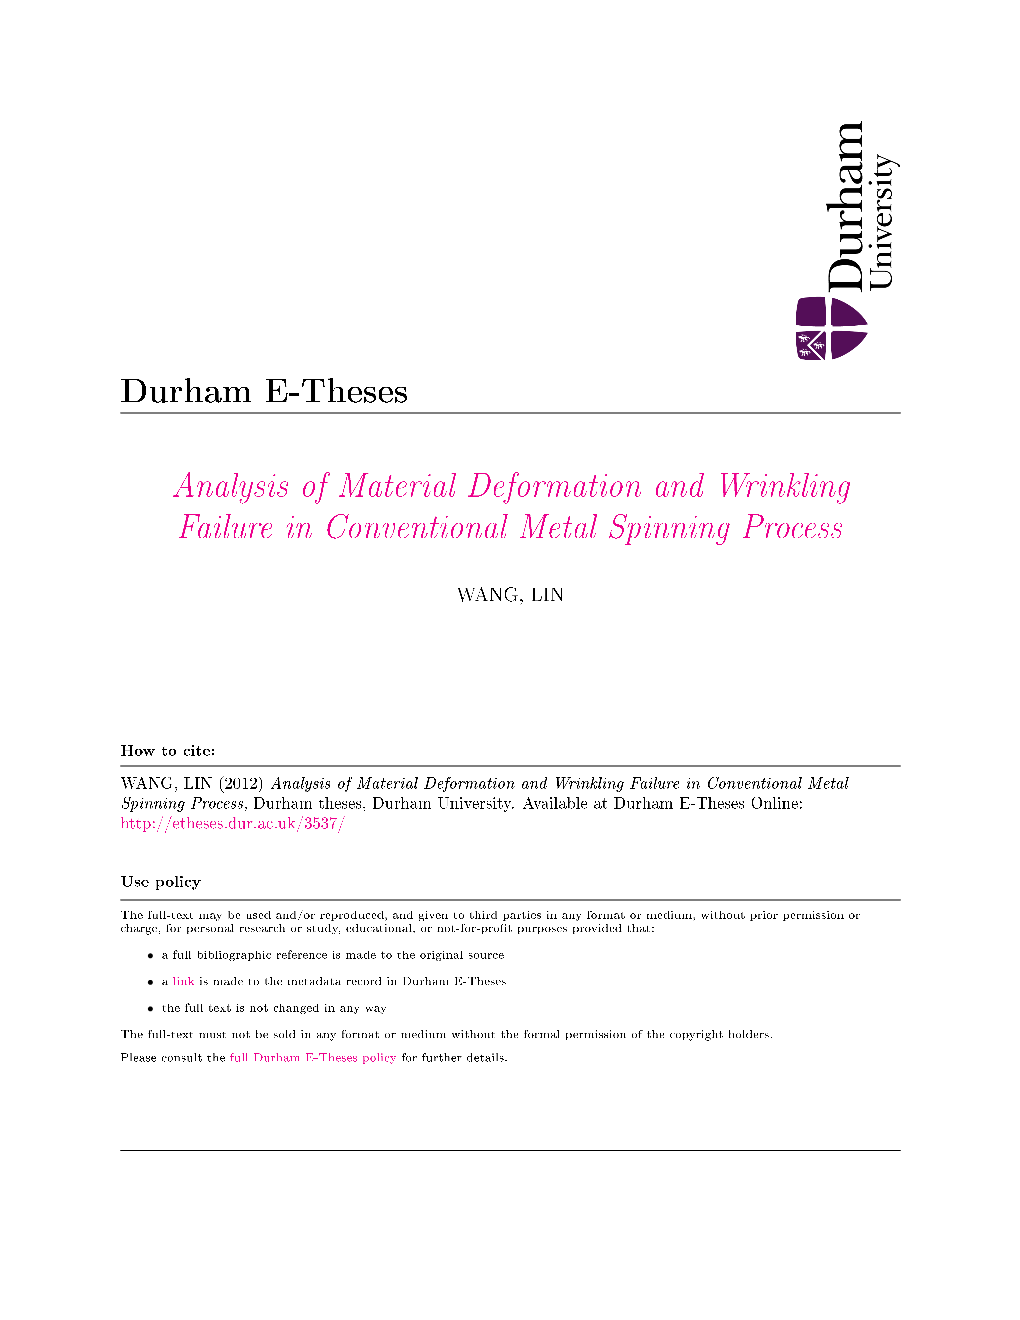 Analysis of Material Deformation and Wrinkling Failure in Conventional Metal Spinning Process